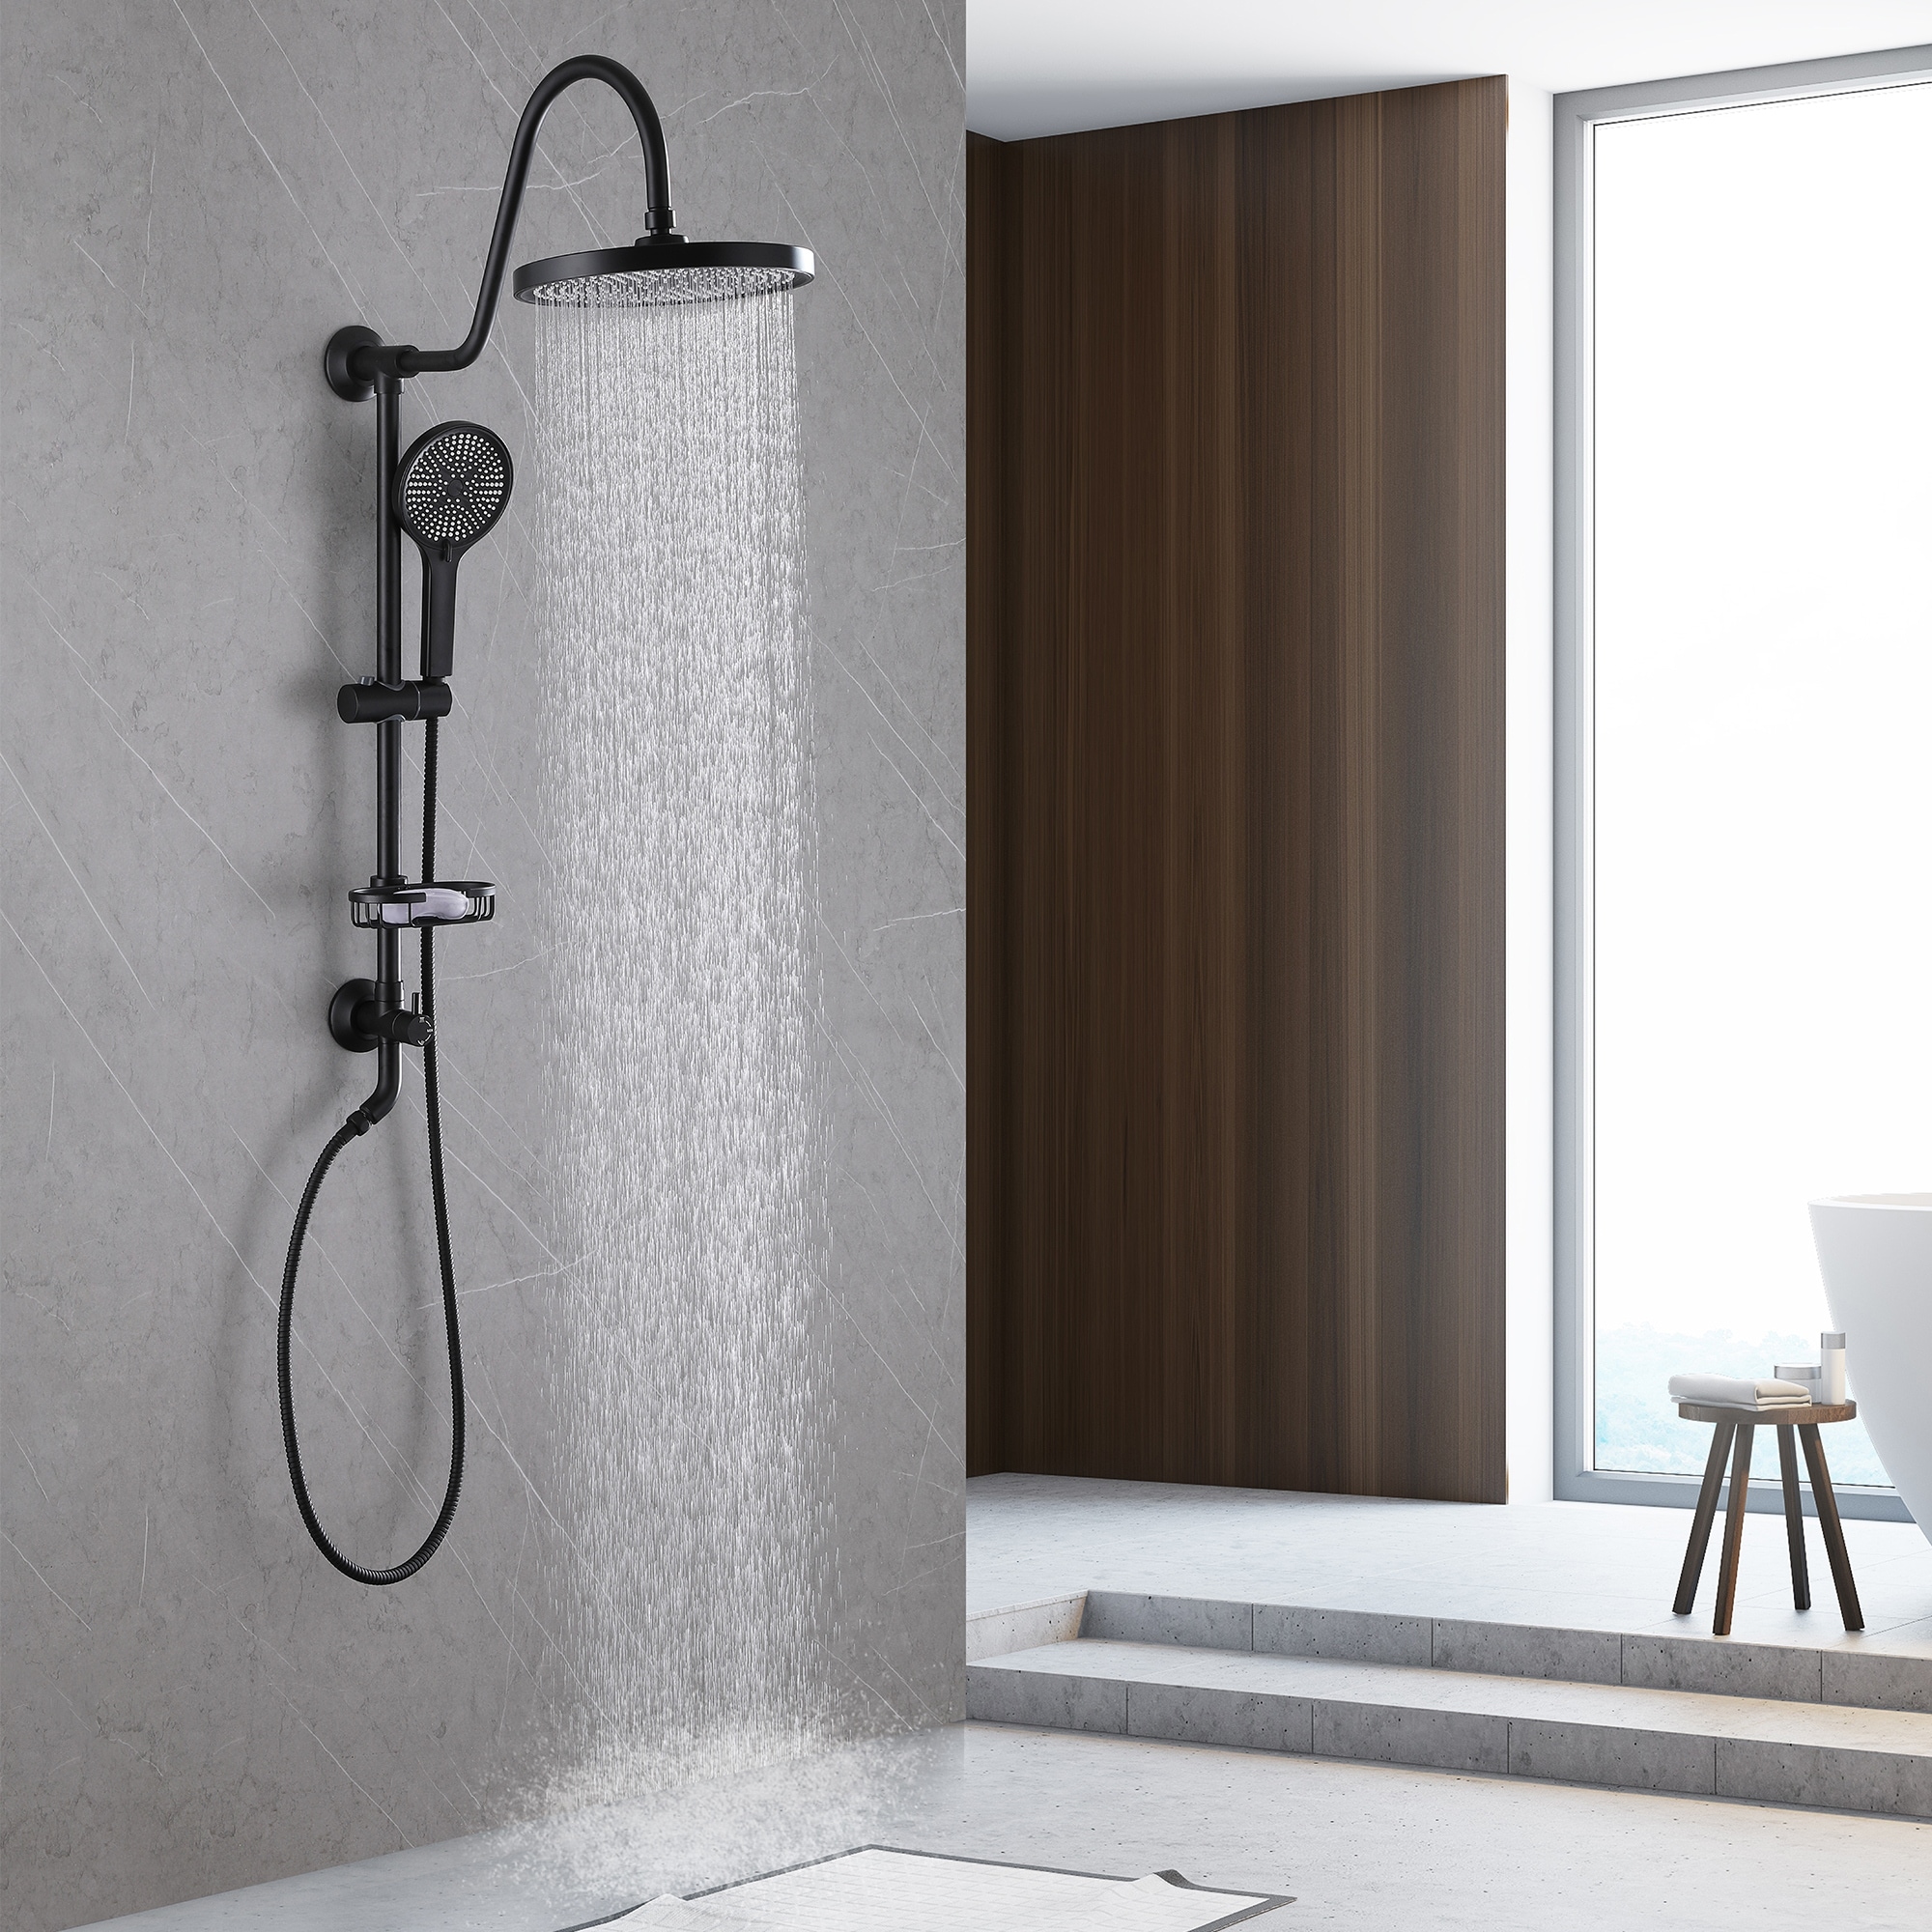 https://ak1.ostkcdn.com/images/products/is/images/direct/13720476c809e9a44fbcfb0a7de6acba76d039f2/Wall-mounted-complete-shower-system-with-soap-dish-%28not-including-the-rough-in-valve%29.jpg